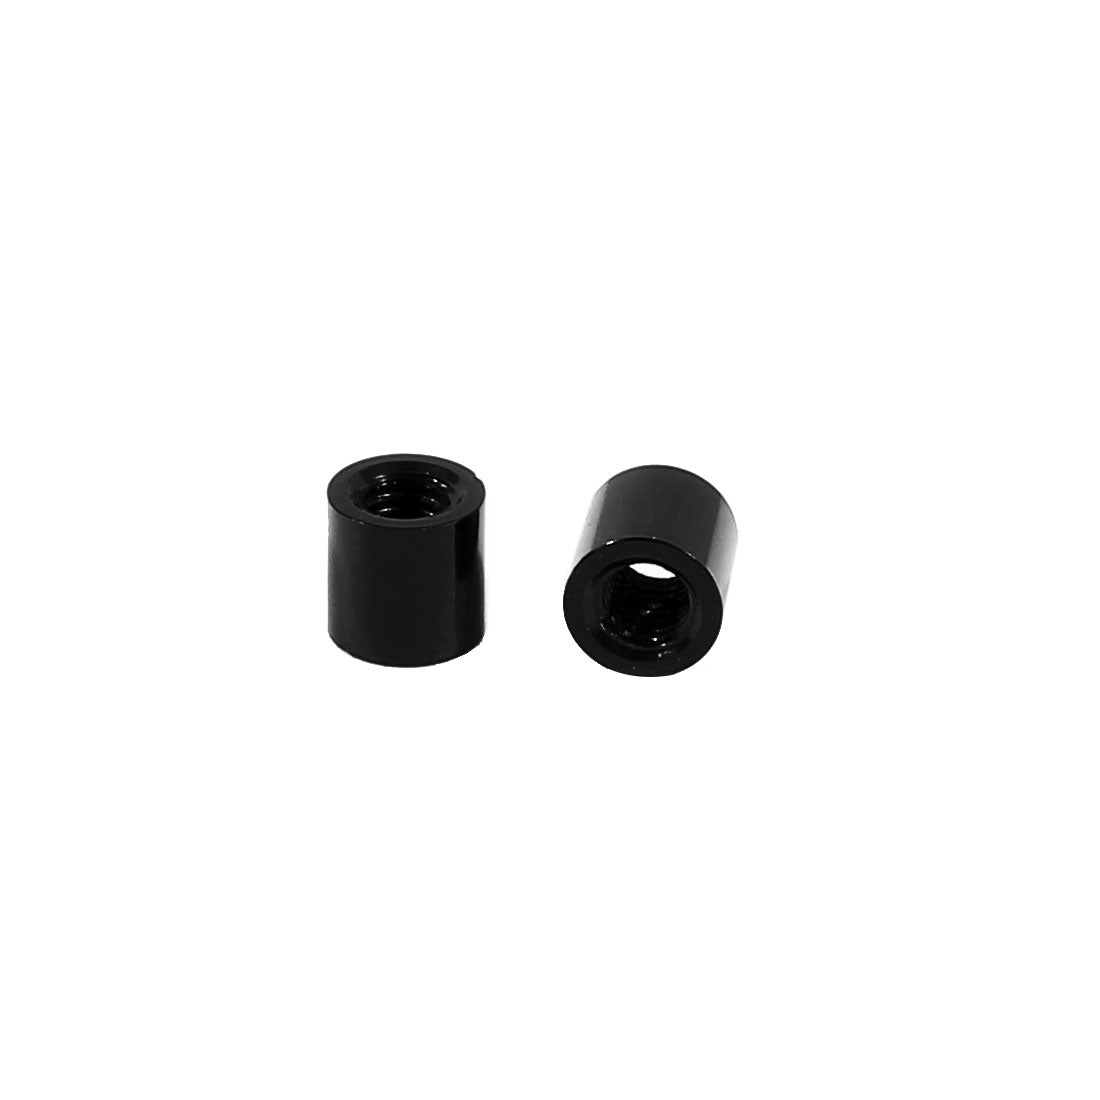 uxcell Uxcell 5Pcs M3 x 5mm Round Aluminum Column Alloy Standoff Spacer Stud Fastener for Quadcopter Black